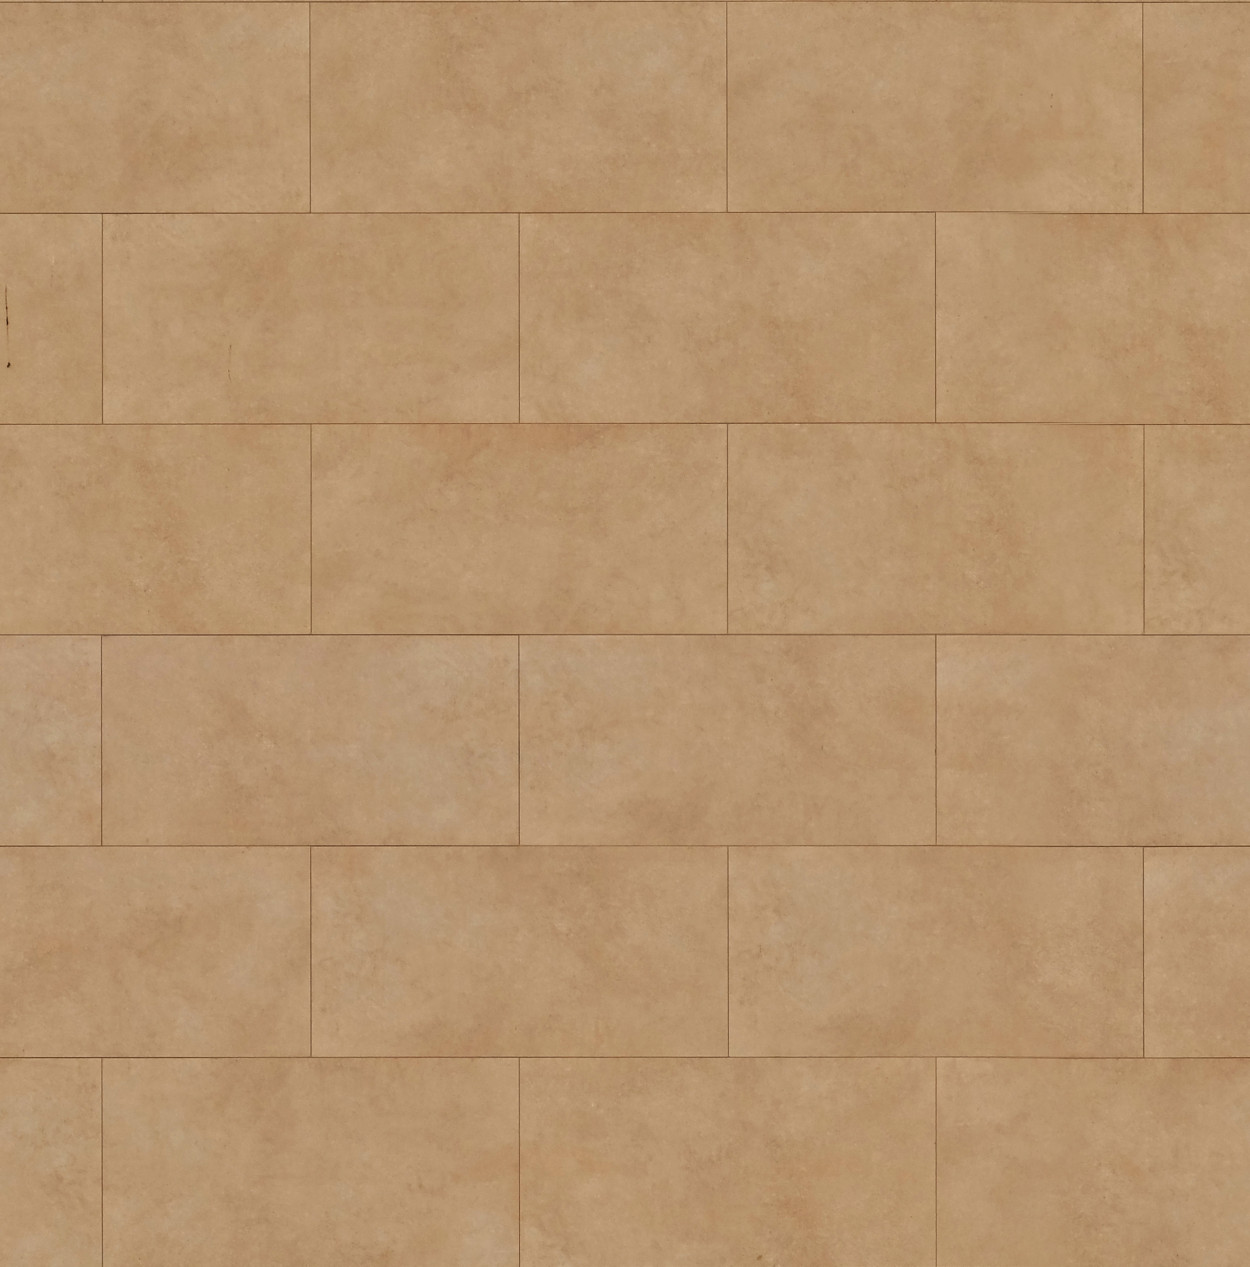 A seamless stone veneer wall texture for use in architectural drawings and 3D models